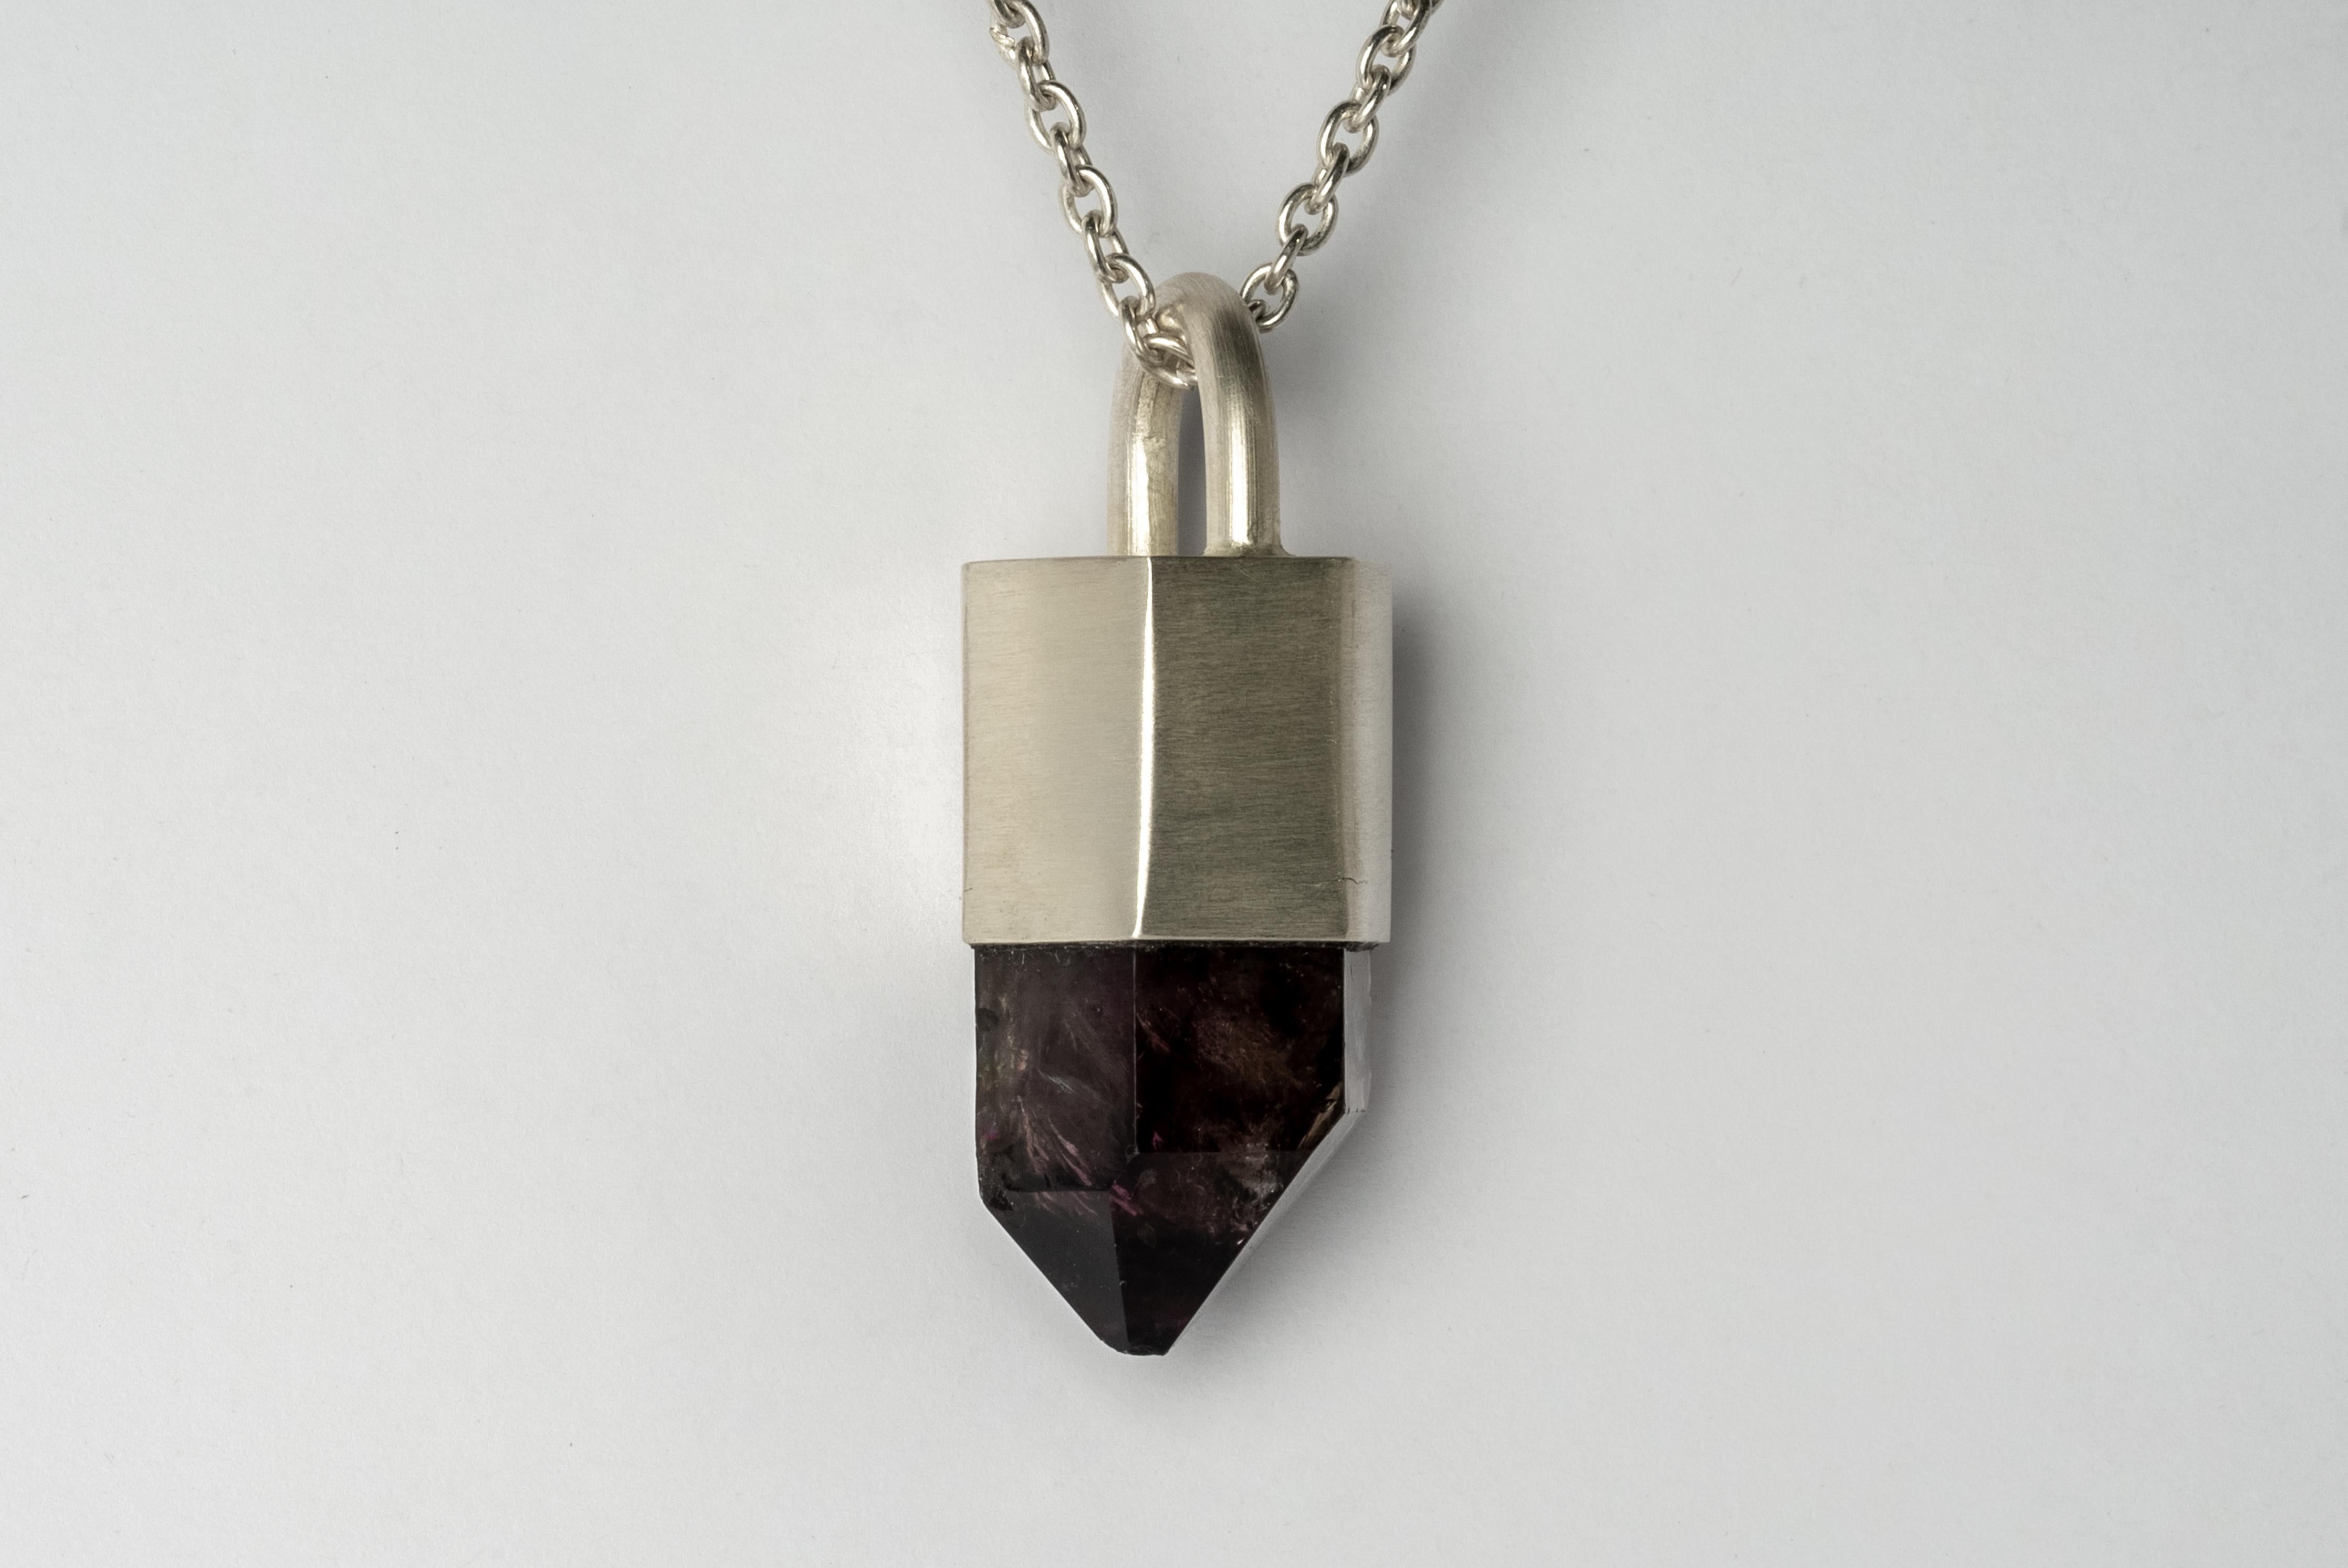 Necklace in matte sterling silver and a rough of brandberg quartz. The Talisman series is an exploration into the power of natural crystals. Tools for Magic. The crystals used in these pieces are discovered through adventure and are hand selected.